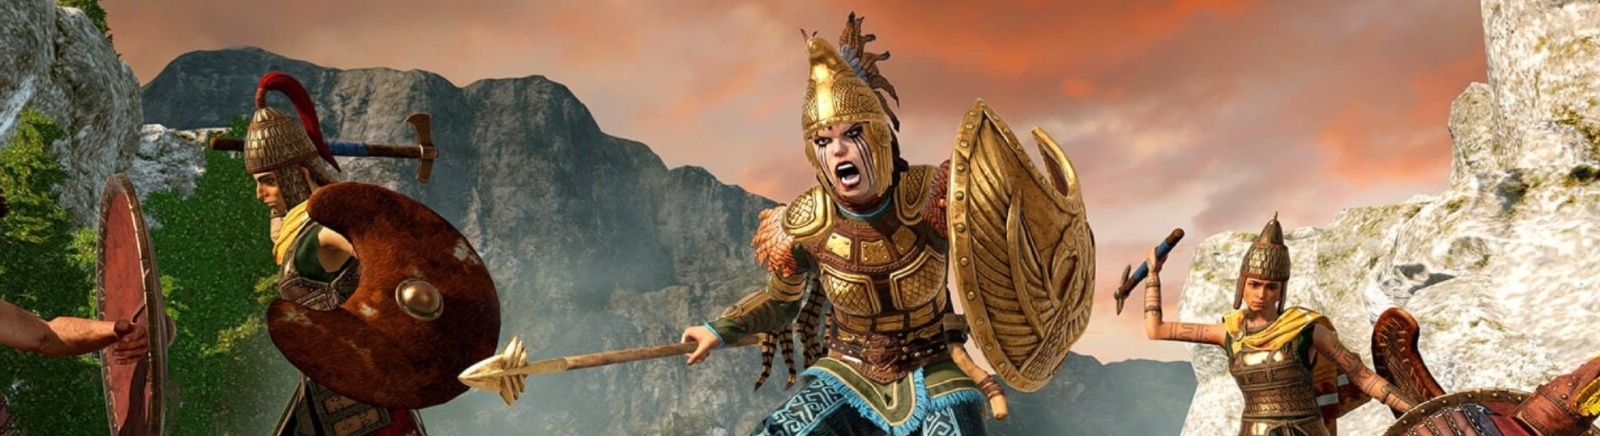 free download total war troy amazons